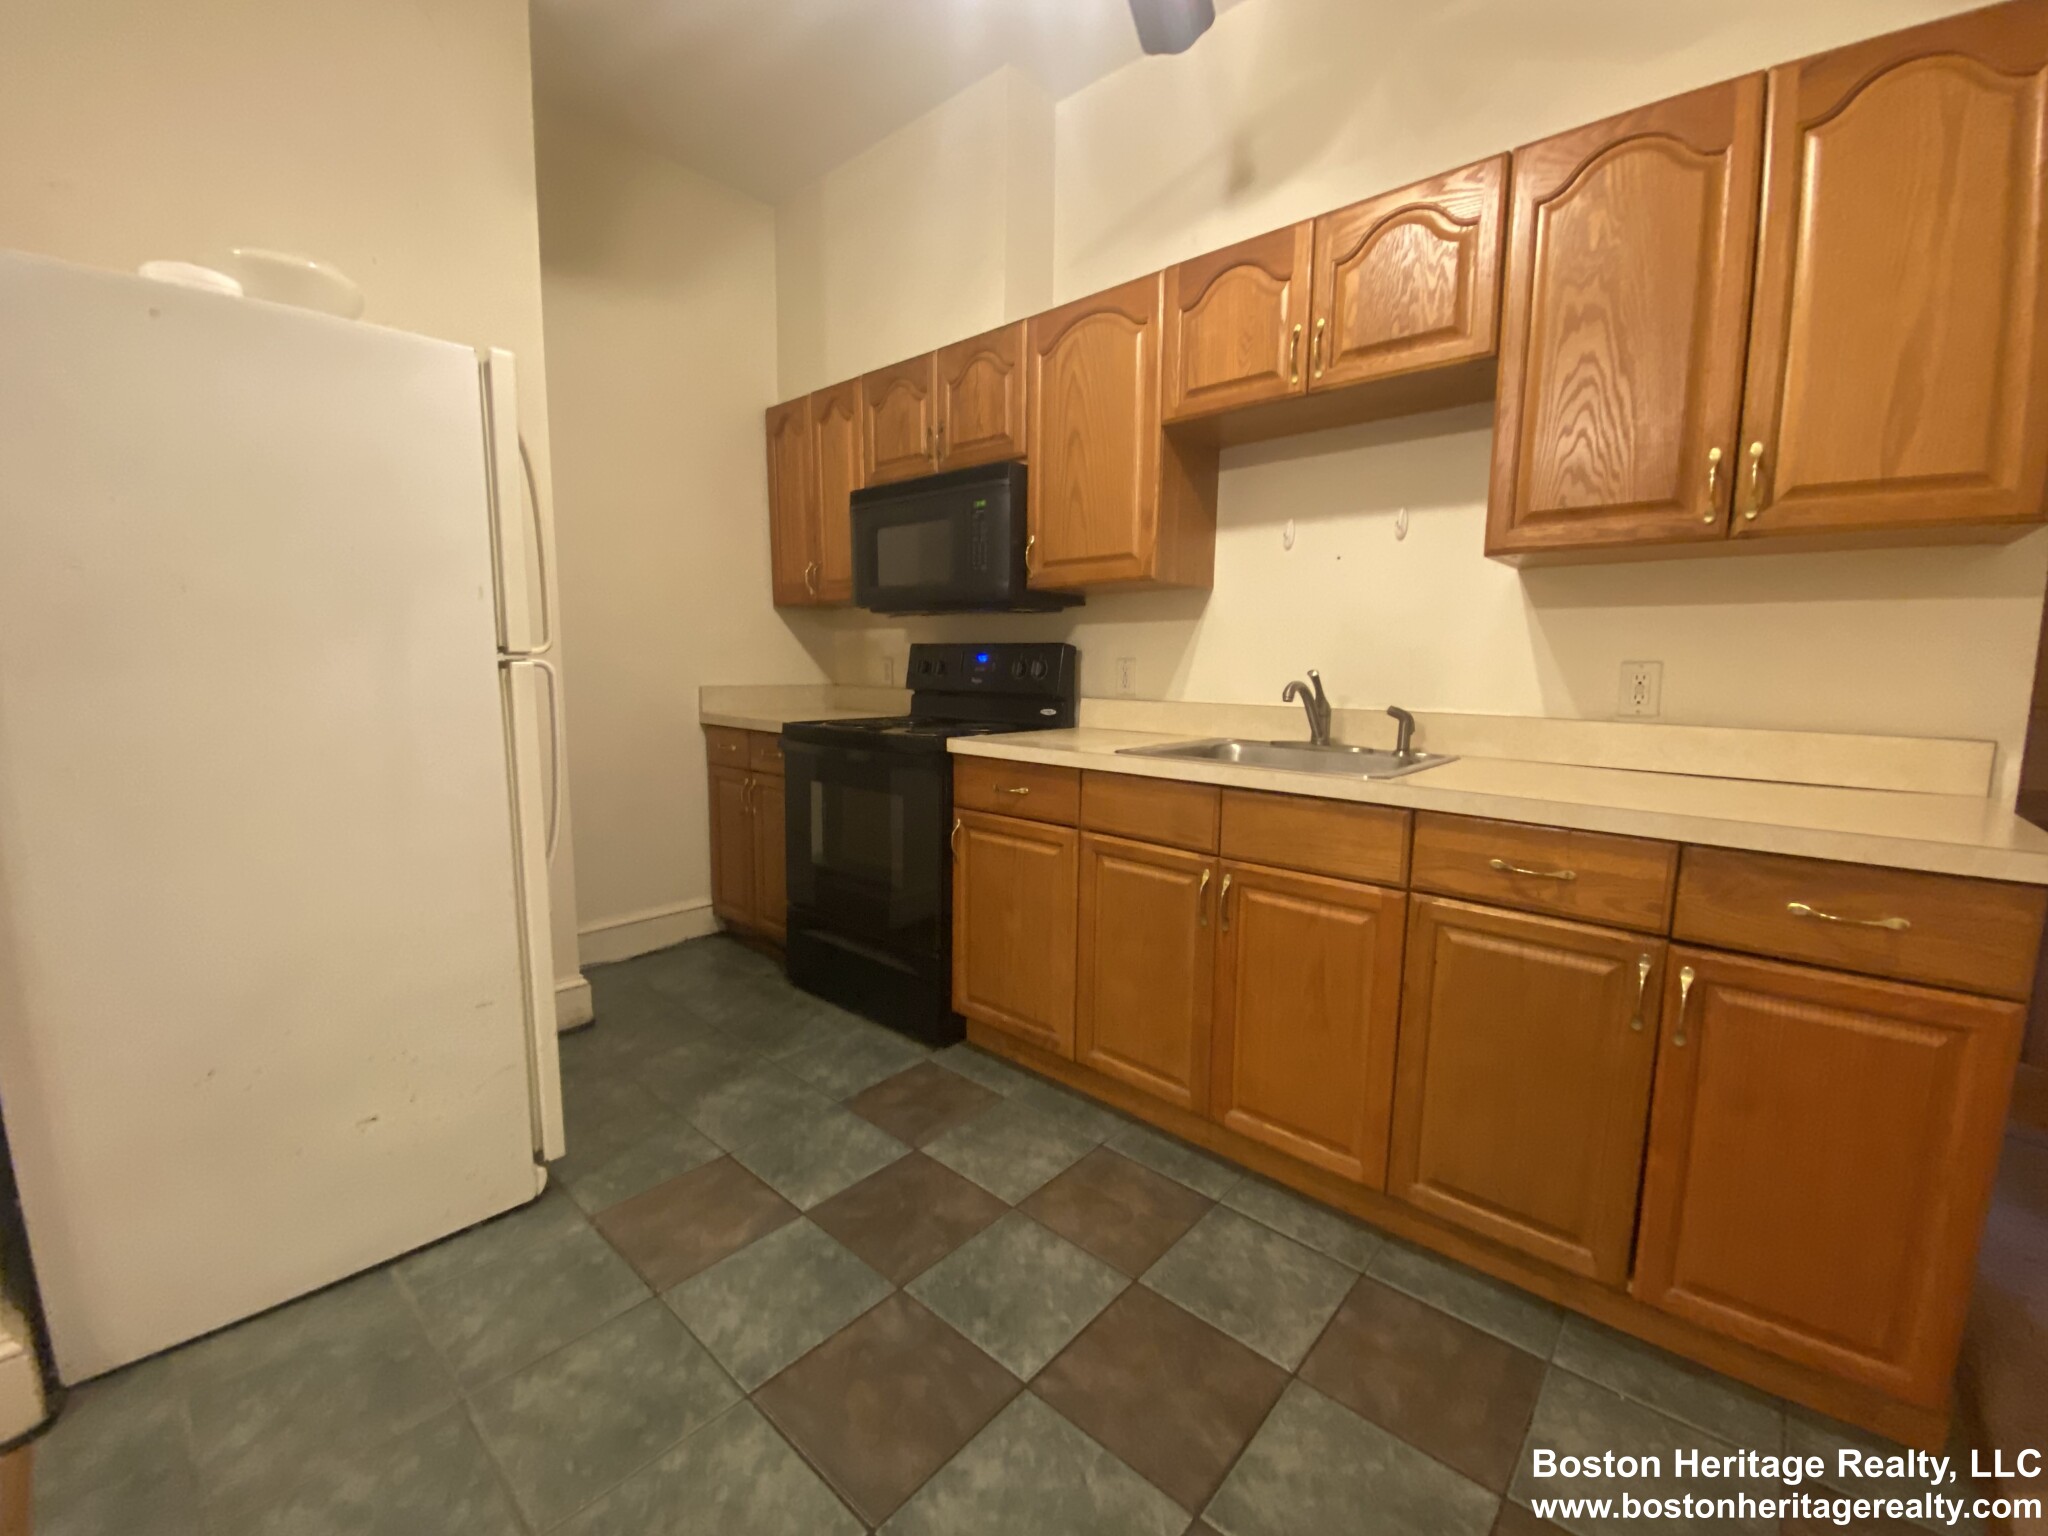 2 Beds, 1 Bath apartment in Boston, Fenway for $2,900